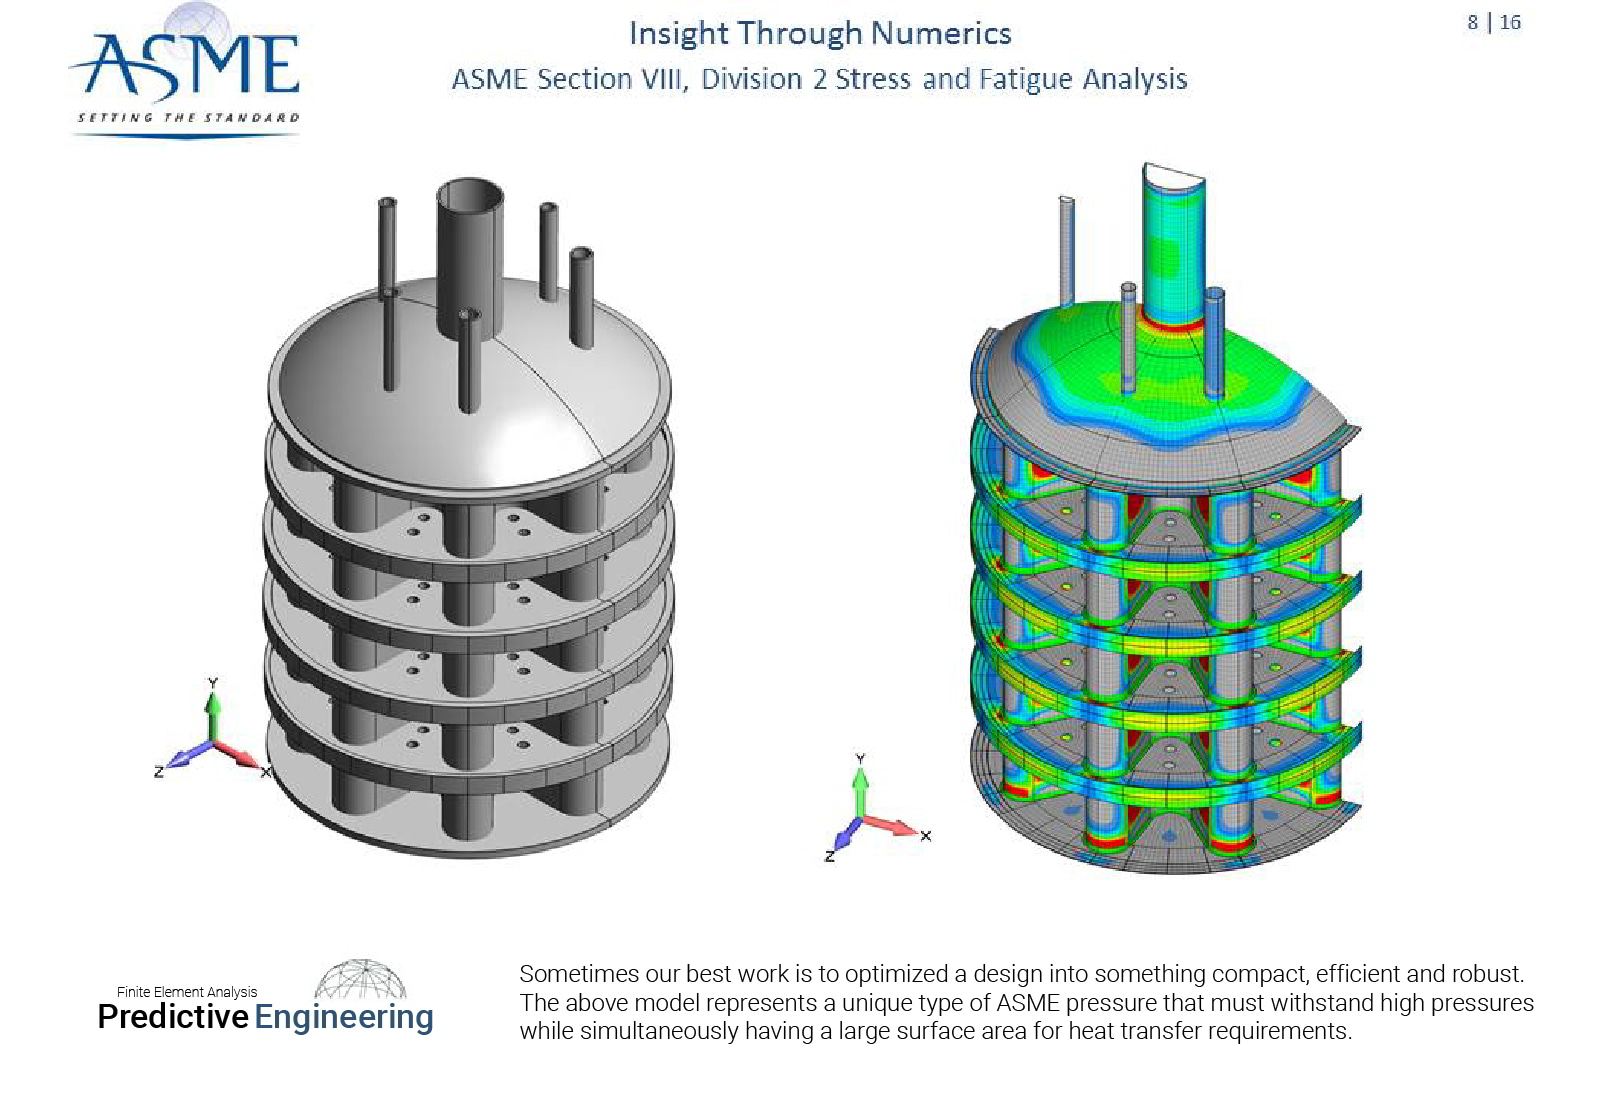 The above model represents a unique type of ASME pressure vessel that must withstand high pressures while simultaneously having a large surface area for heat transfer requirements - - Predictive Engineering ASME BPVC Pressure Vessel Consulting Services